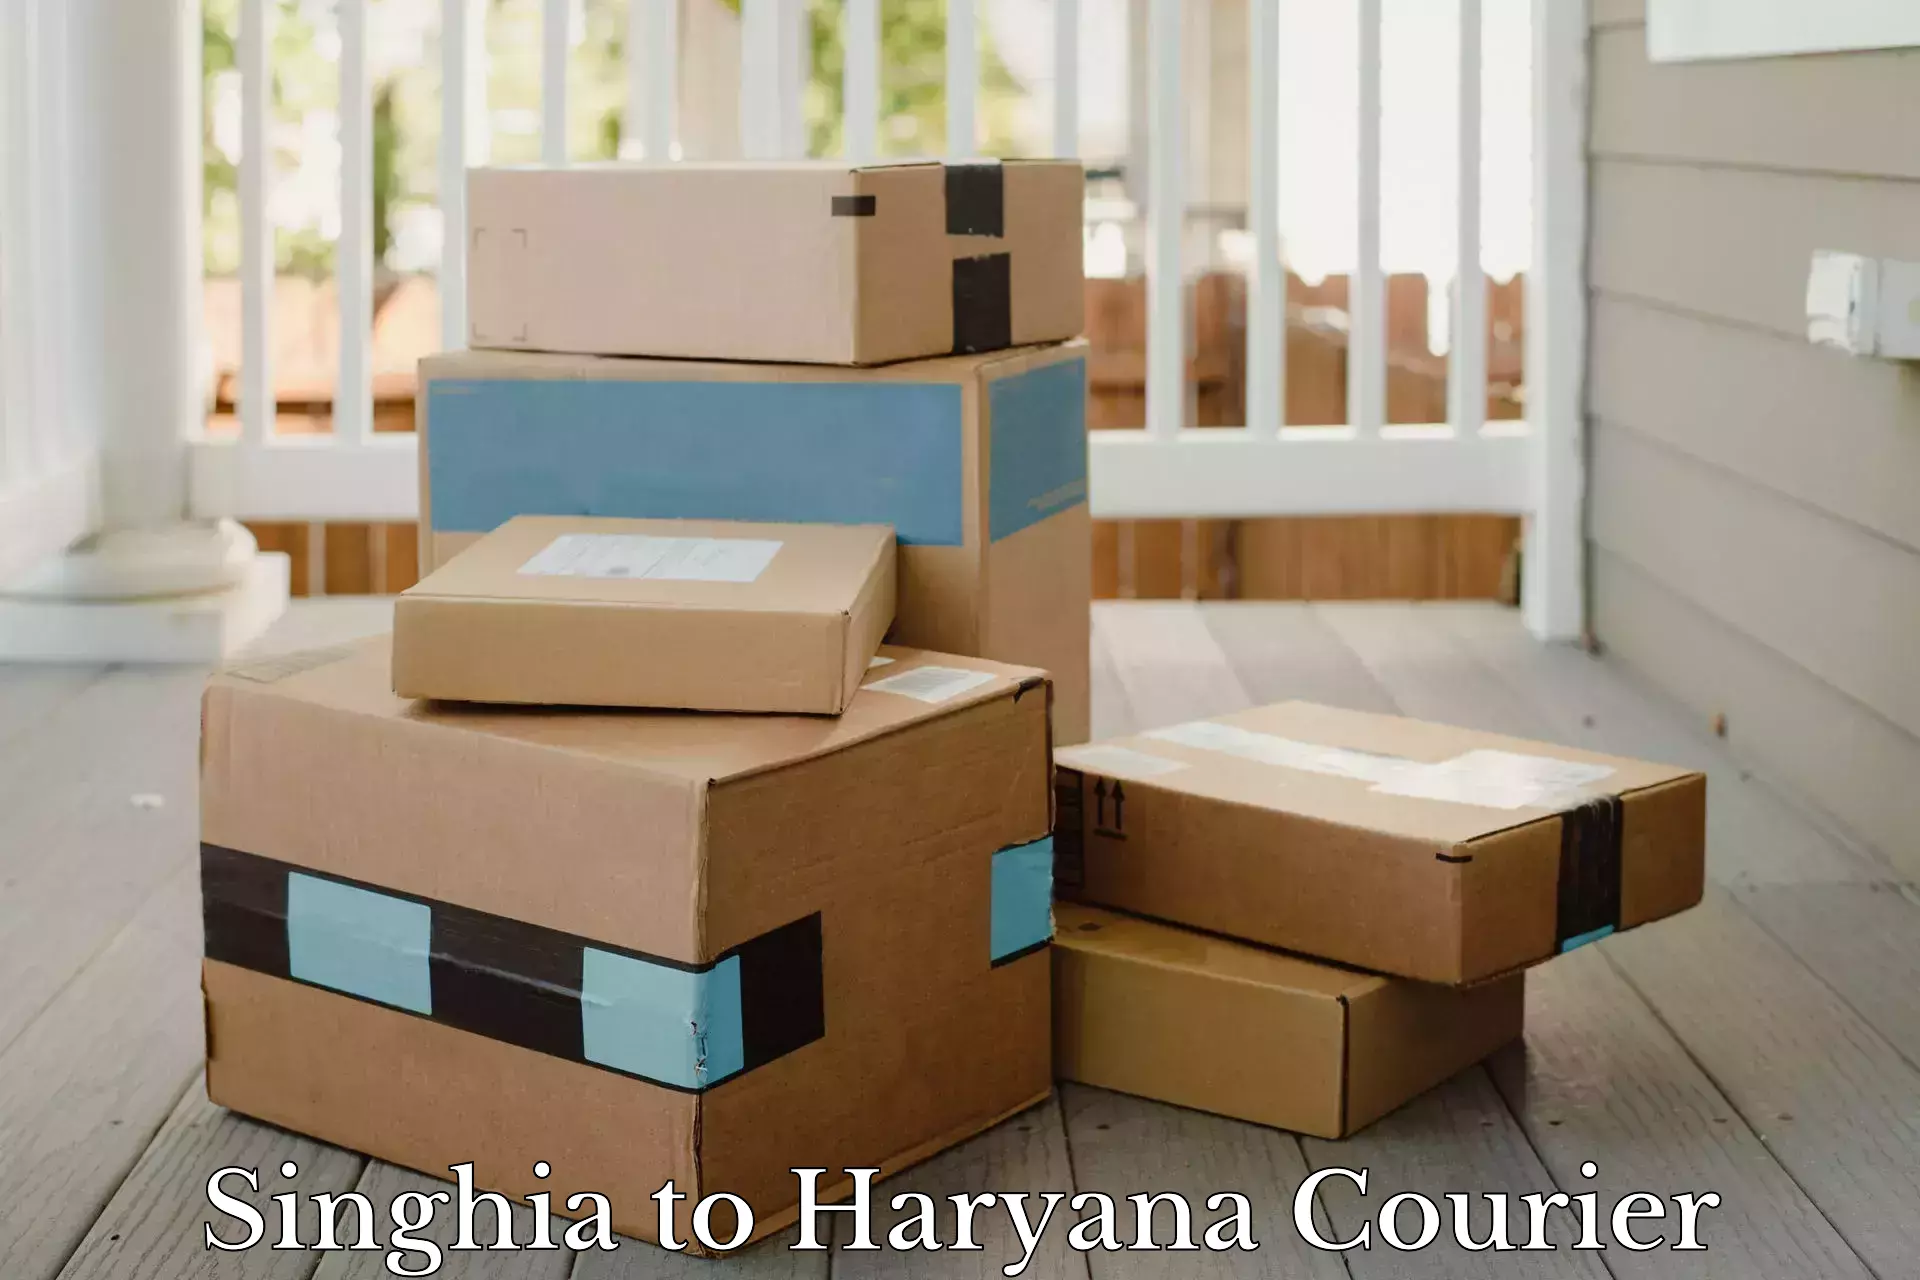 Professional courier handling Singhia to Sirsa